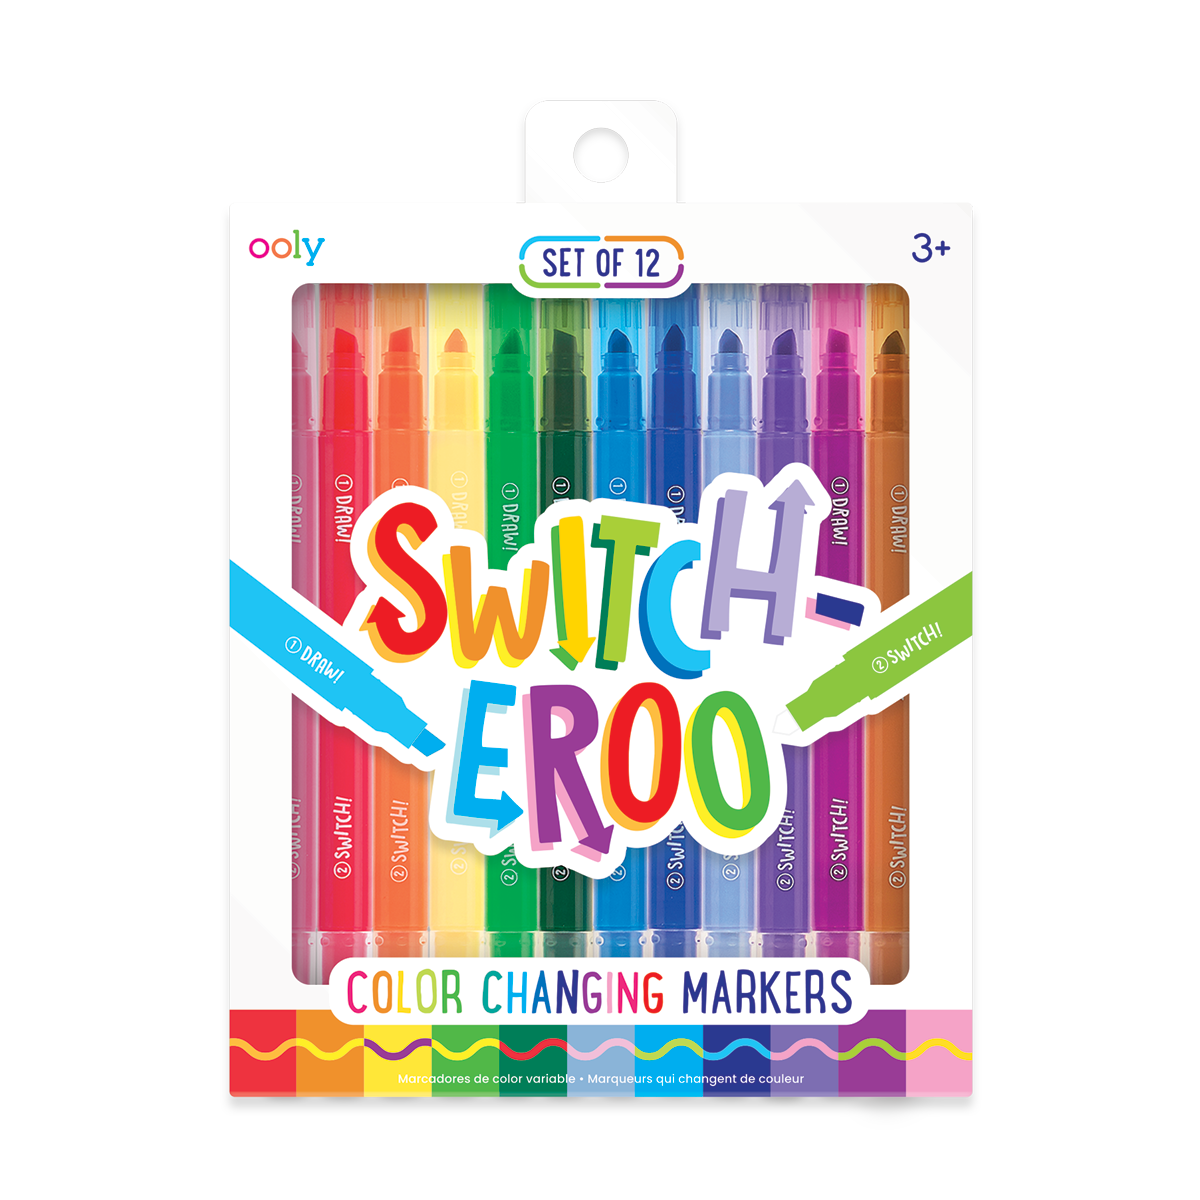 OOLY Image of Switch-Eroo Color Changing Markers in new packaging